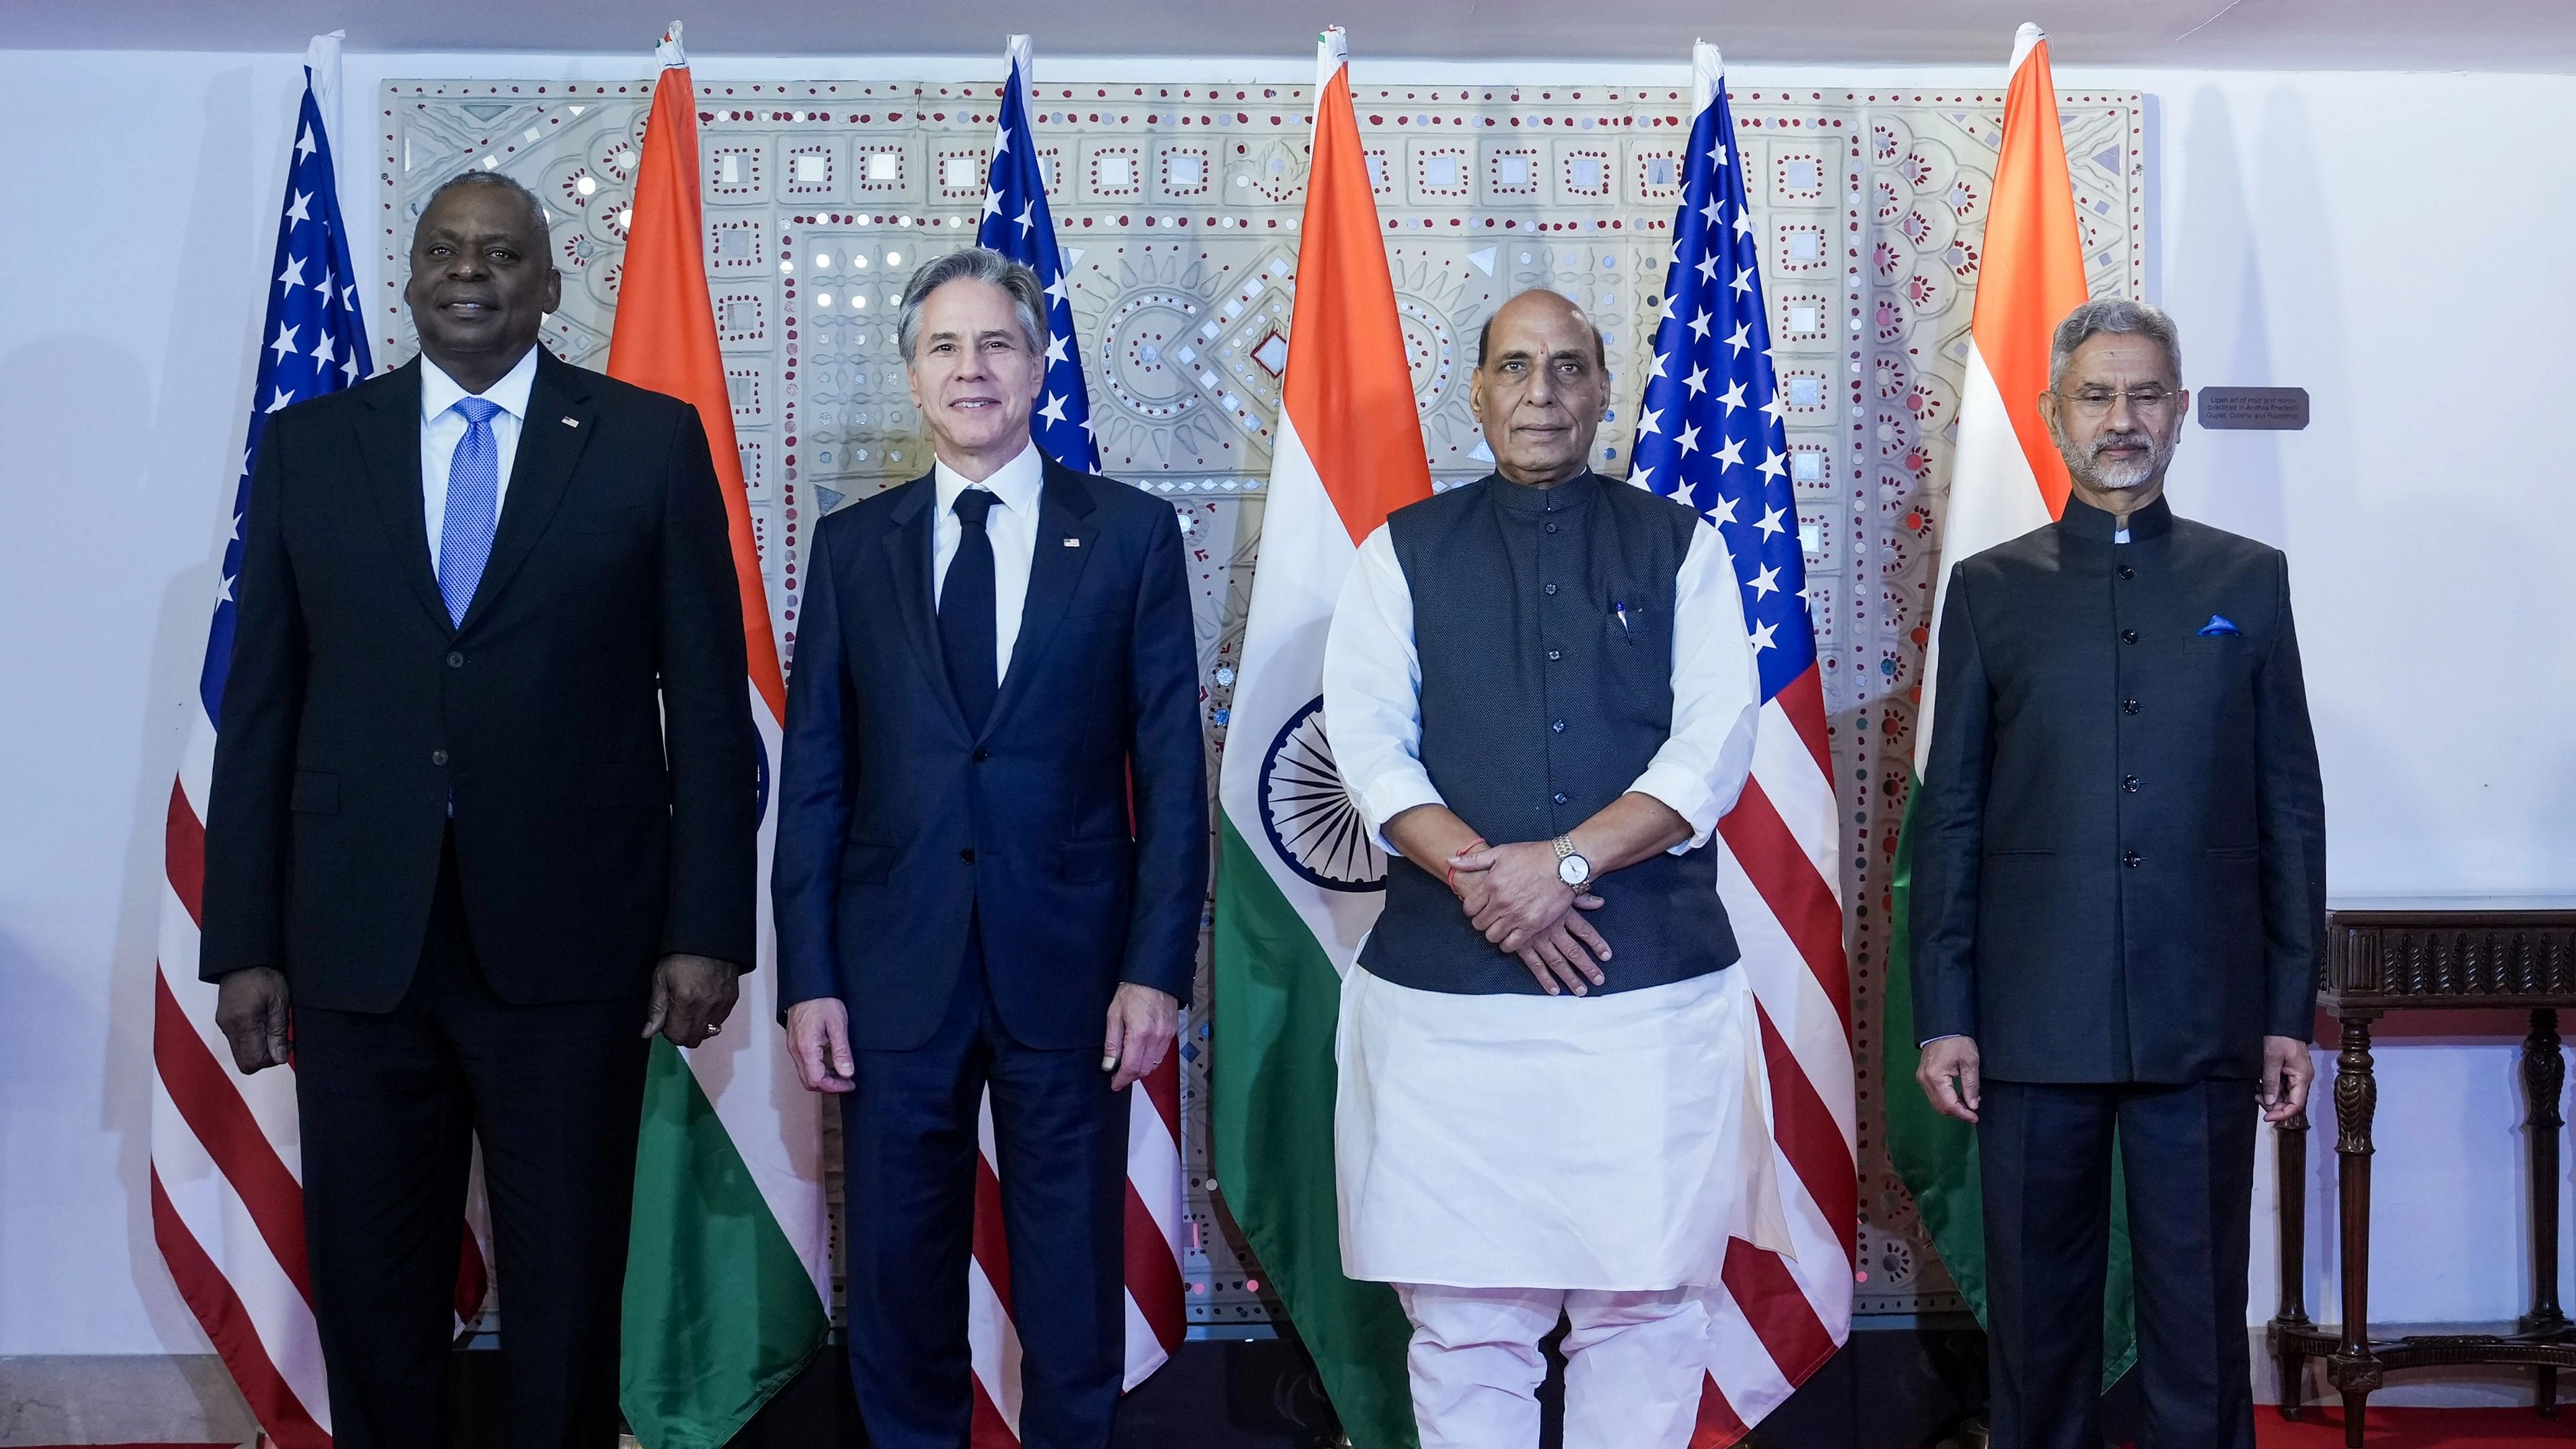 <div class="paragraphs"><p>Defence Minister Rajnath Singh and External Affairs Minister S Jaishankar with US Secretary of State Antony Blinken and US Secretary of Defence Lloyd Austin pose for a group photo before the 5th India-US 2+2 Ministerial Dialogue, at Sushma Swaraj Bhavan, in New Delhi, Friday, Nov. 10, 2023. </p></div>